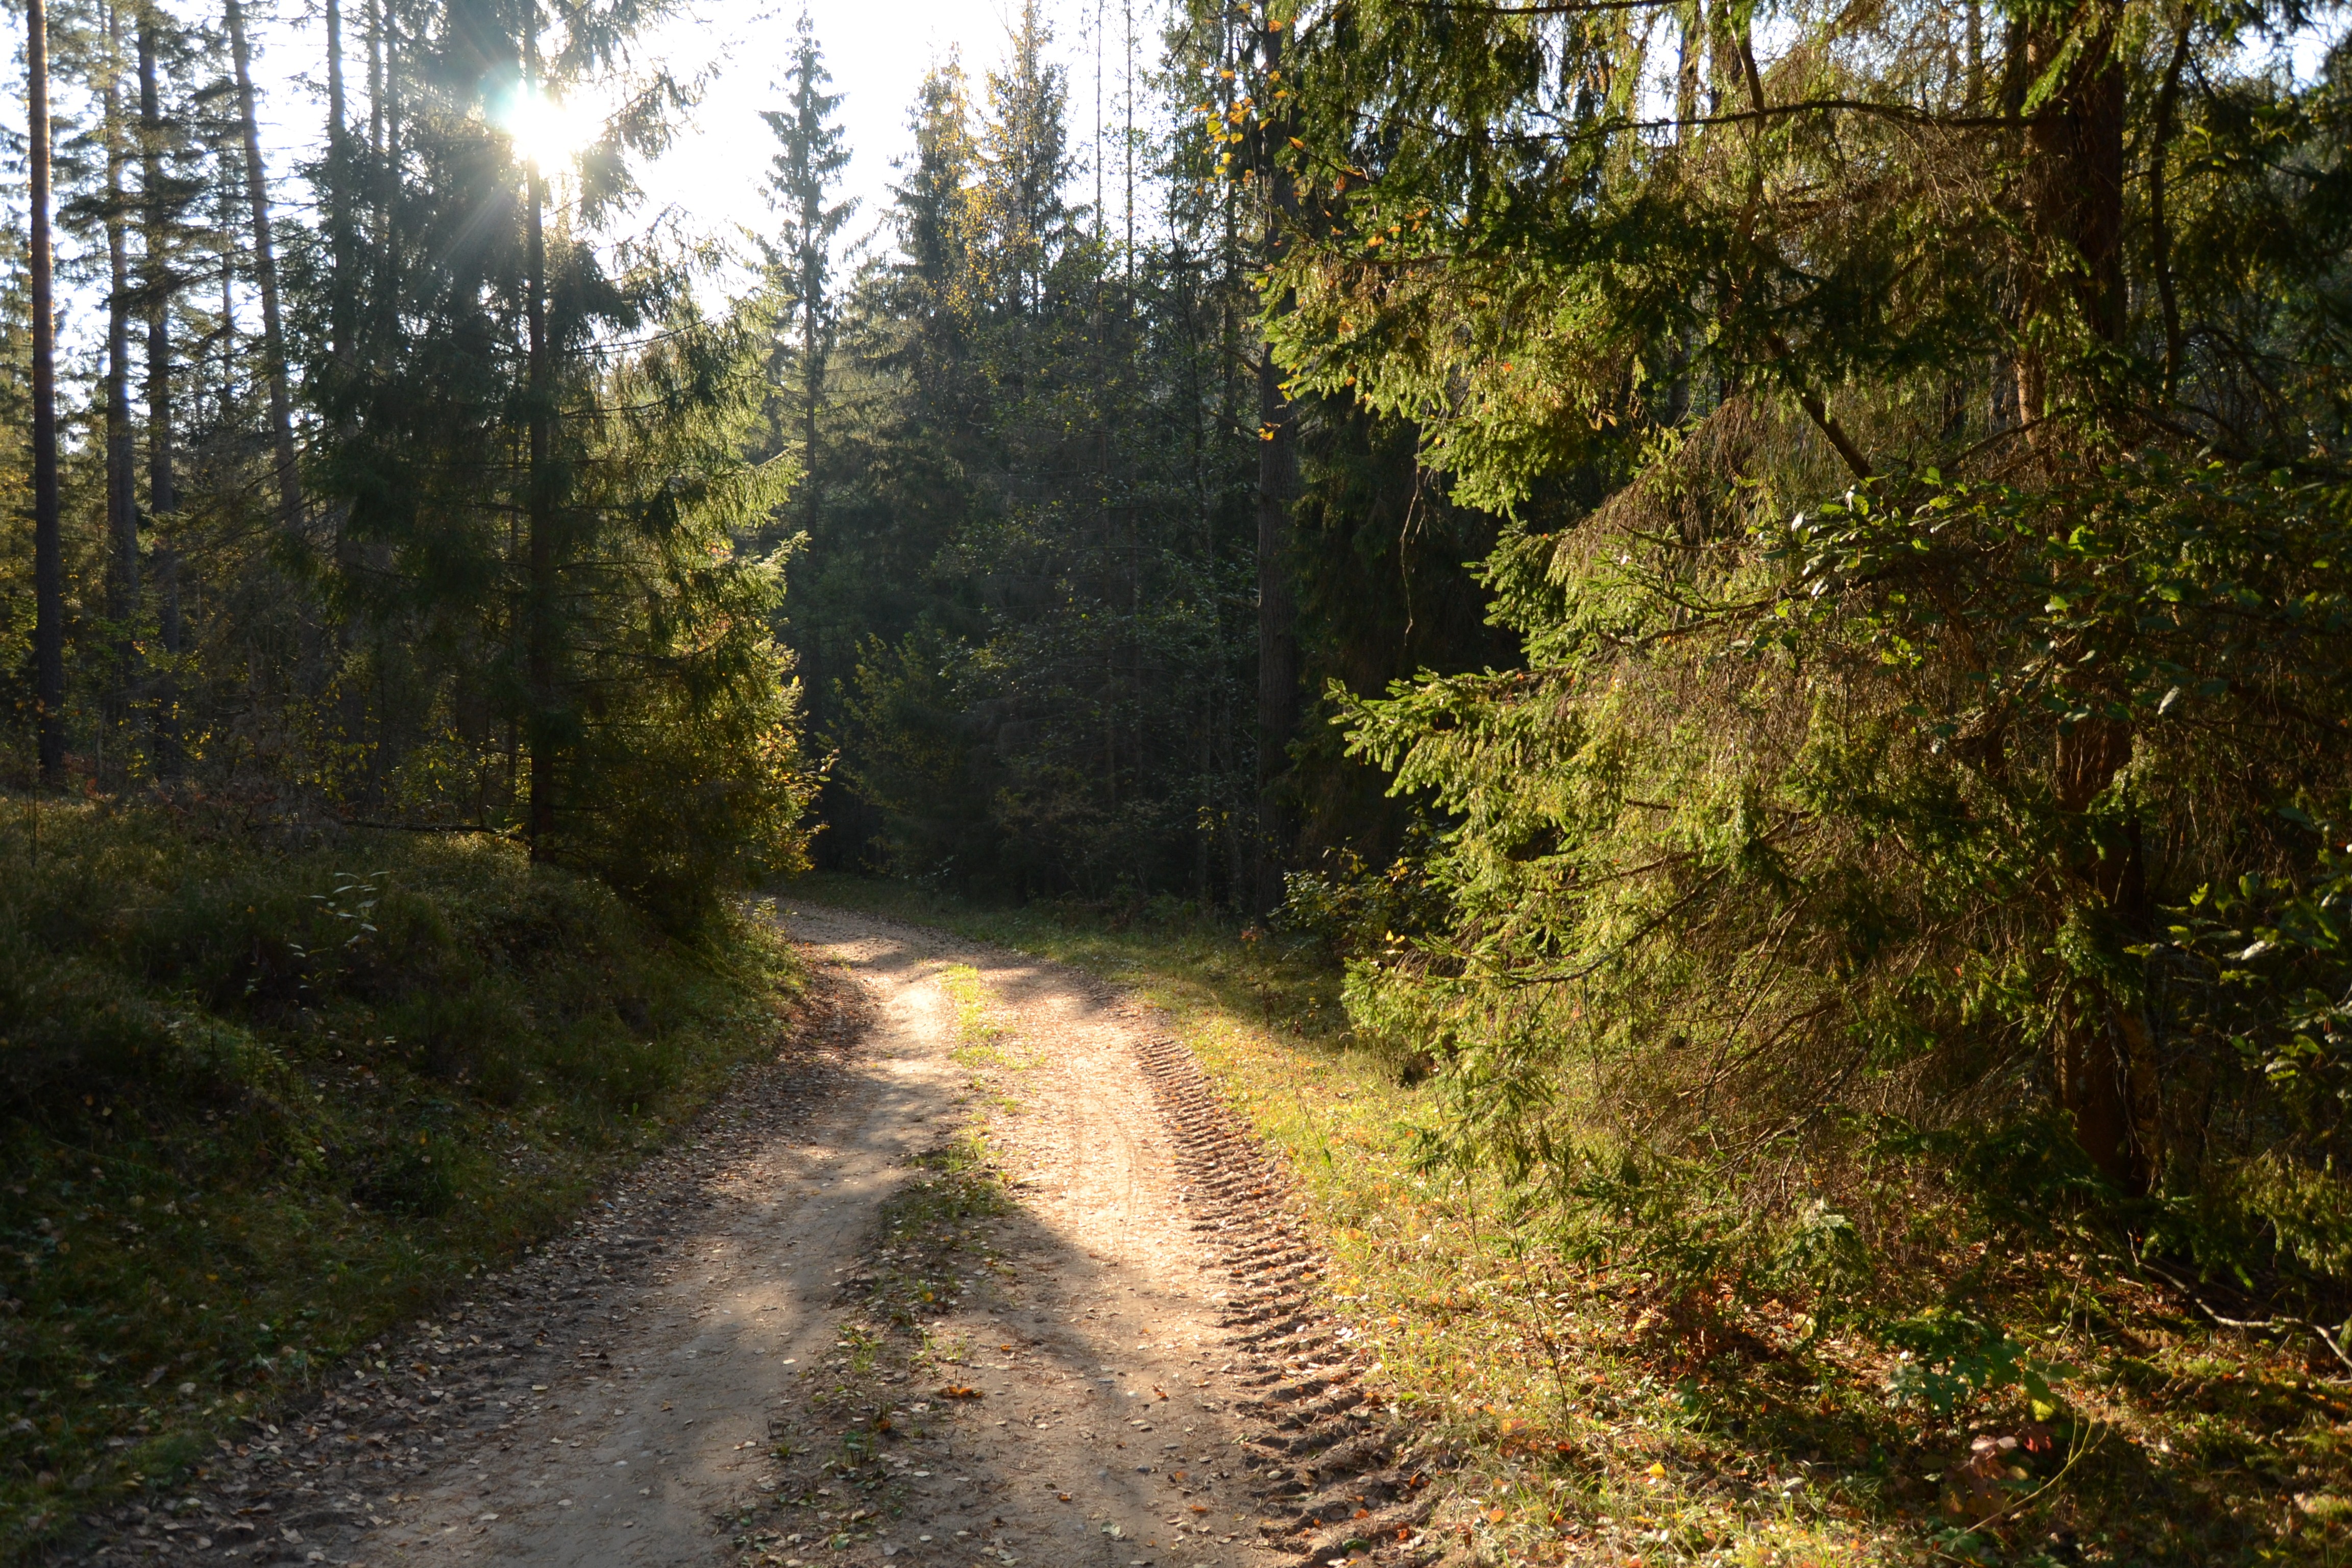 General 4608x3072 nature trees sunlight path forest dirt road outdoors